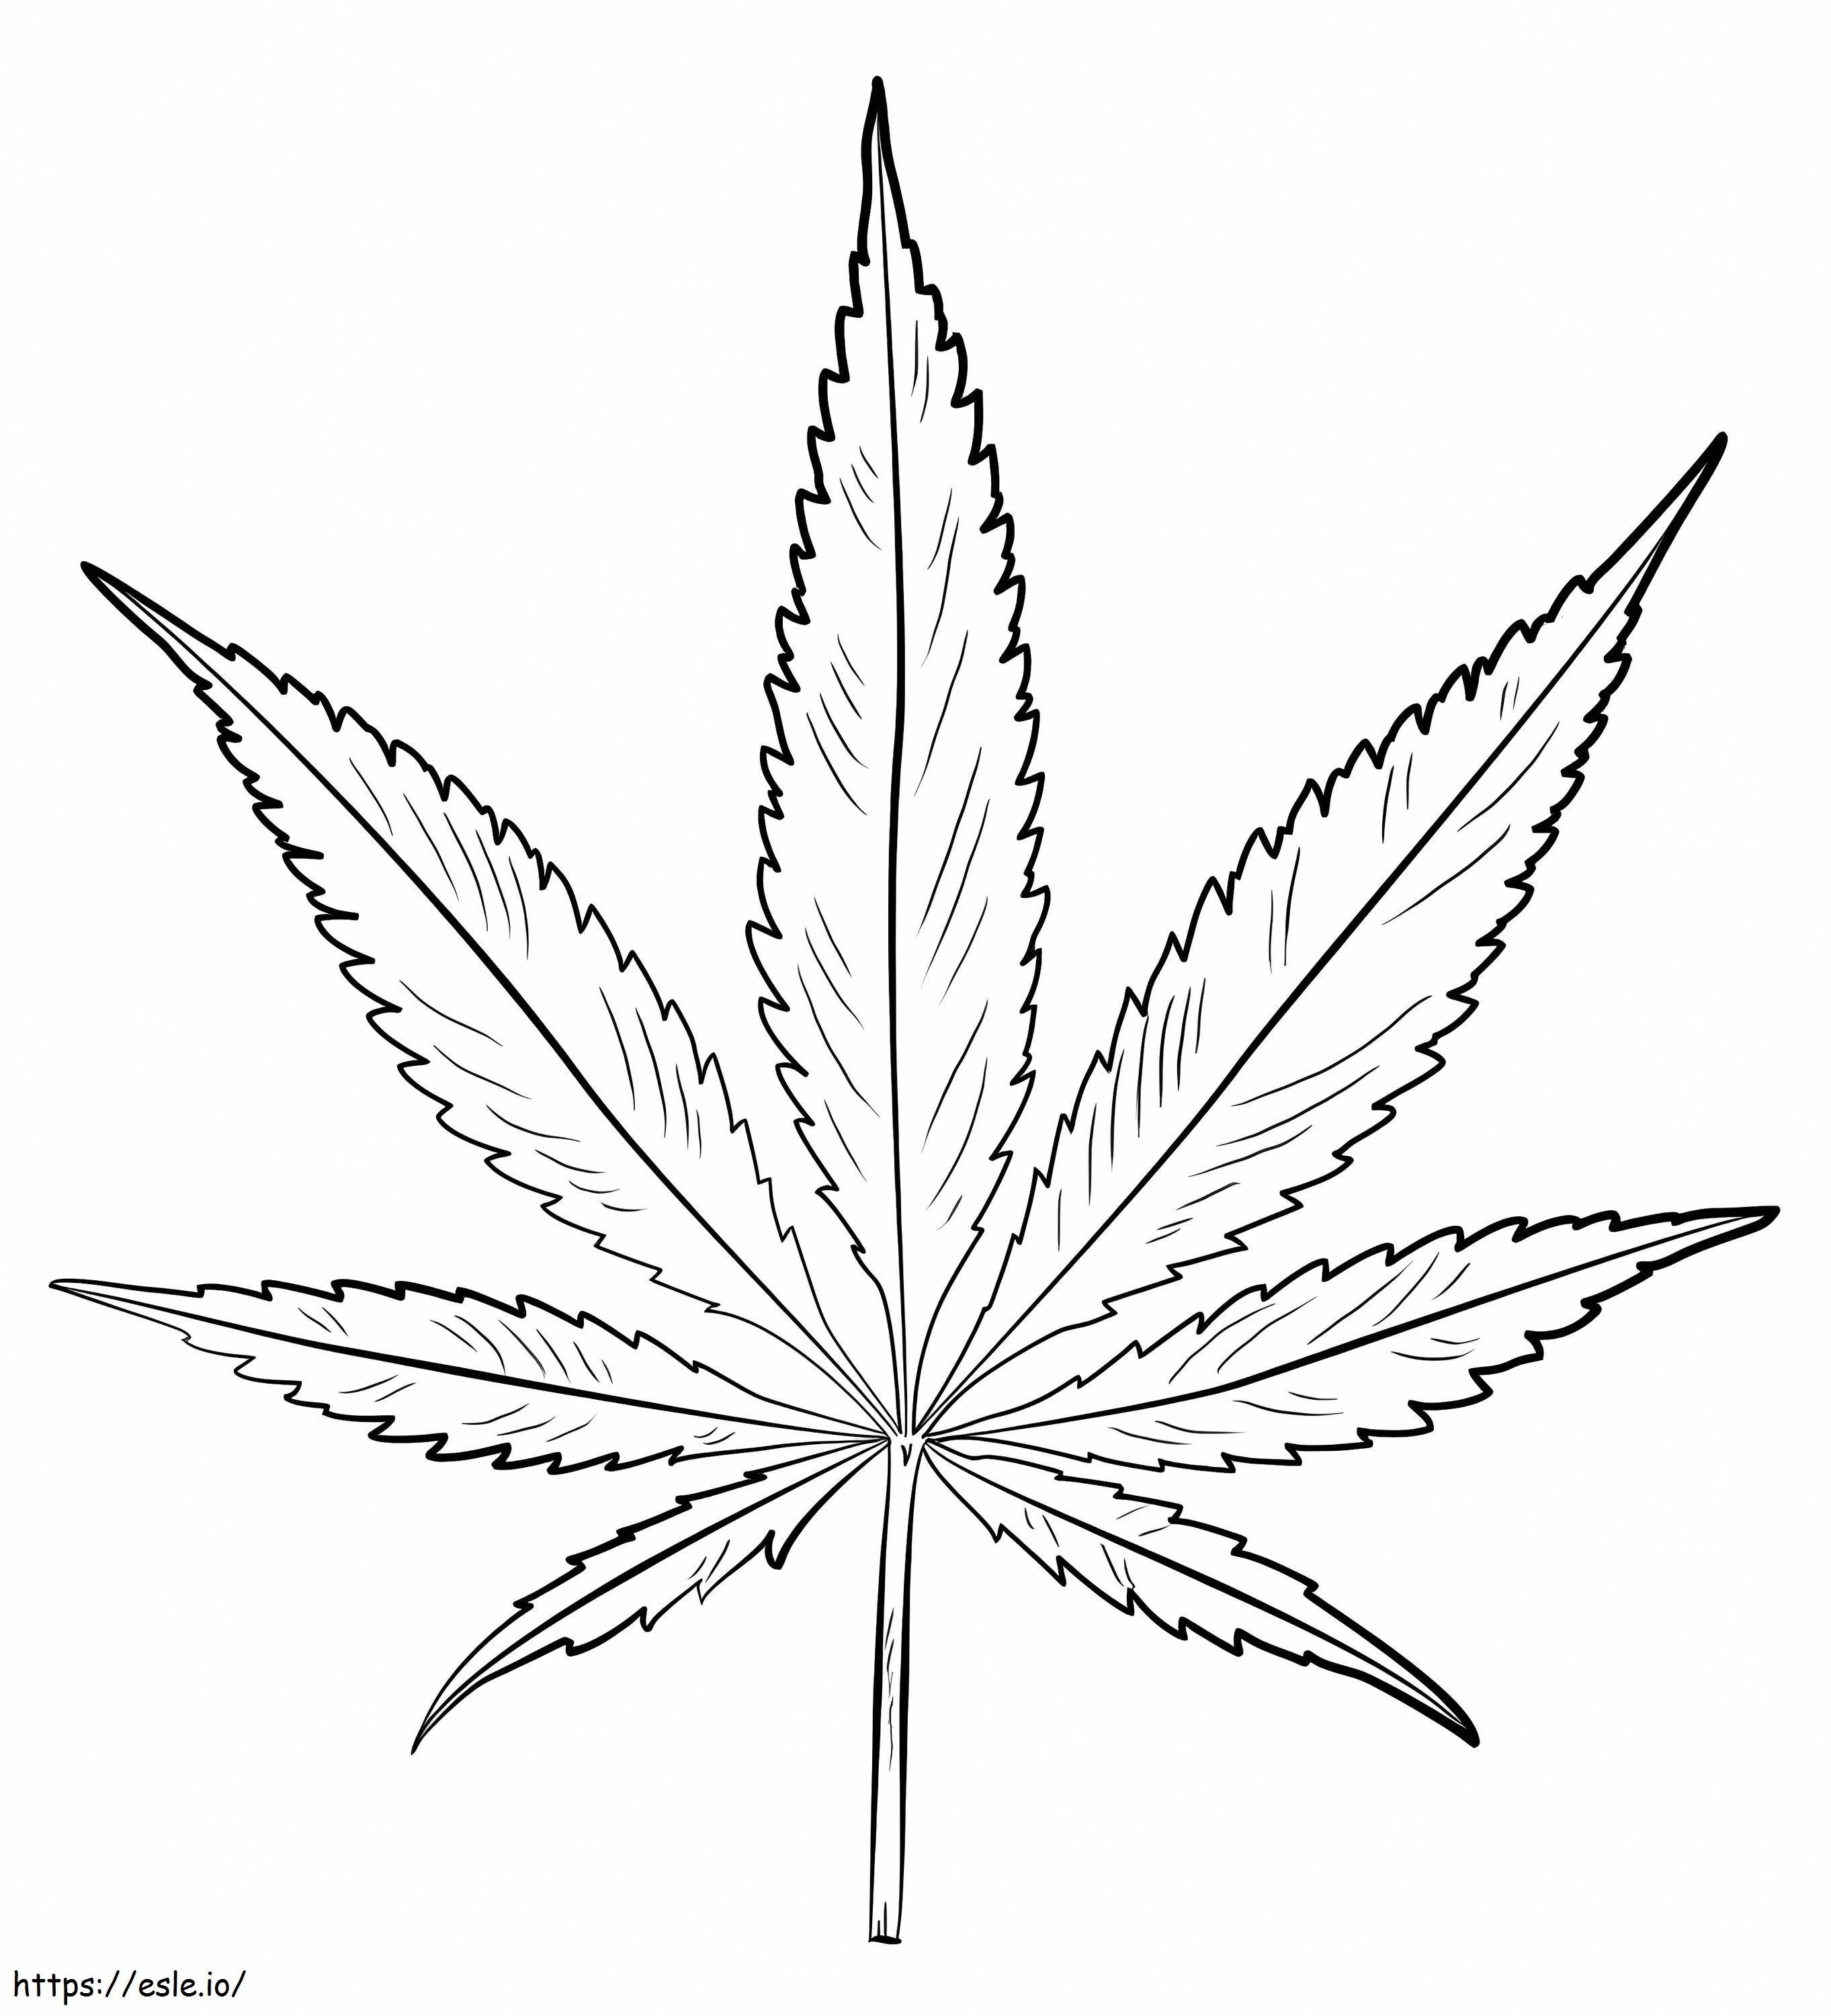 Weed 3 coloring page